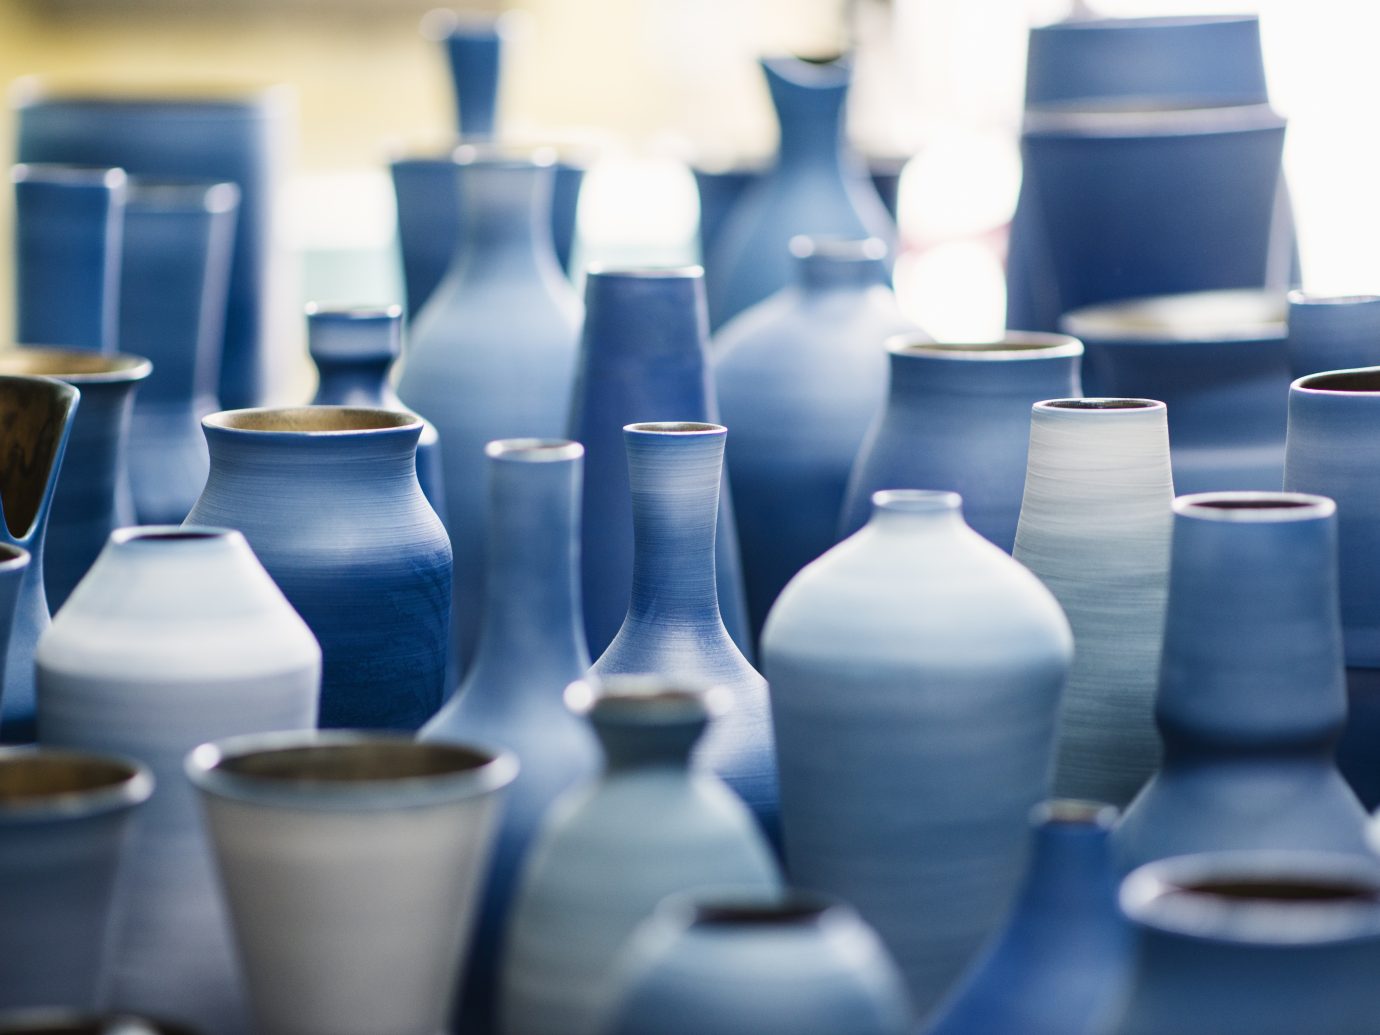 Ceramic pottery in shades of blue